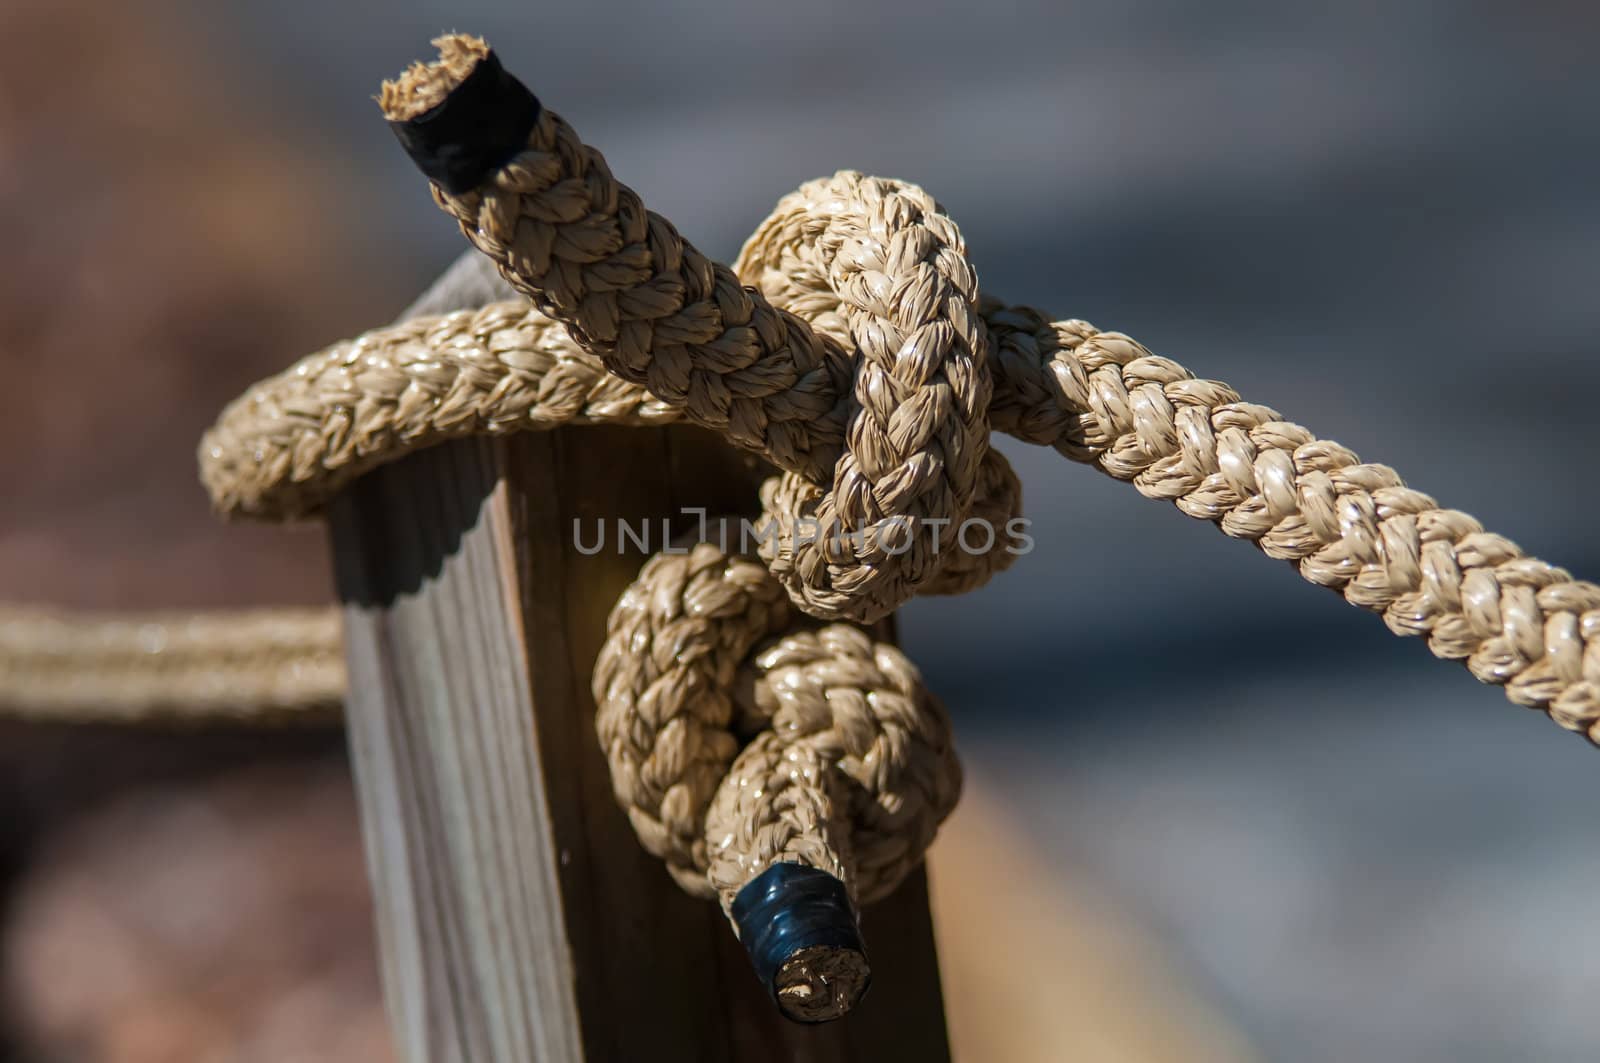 rope knot